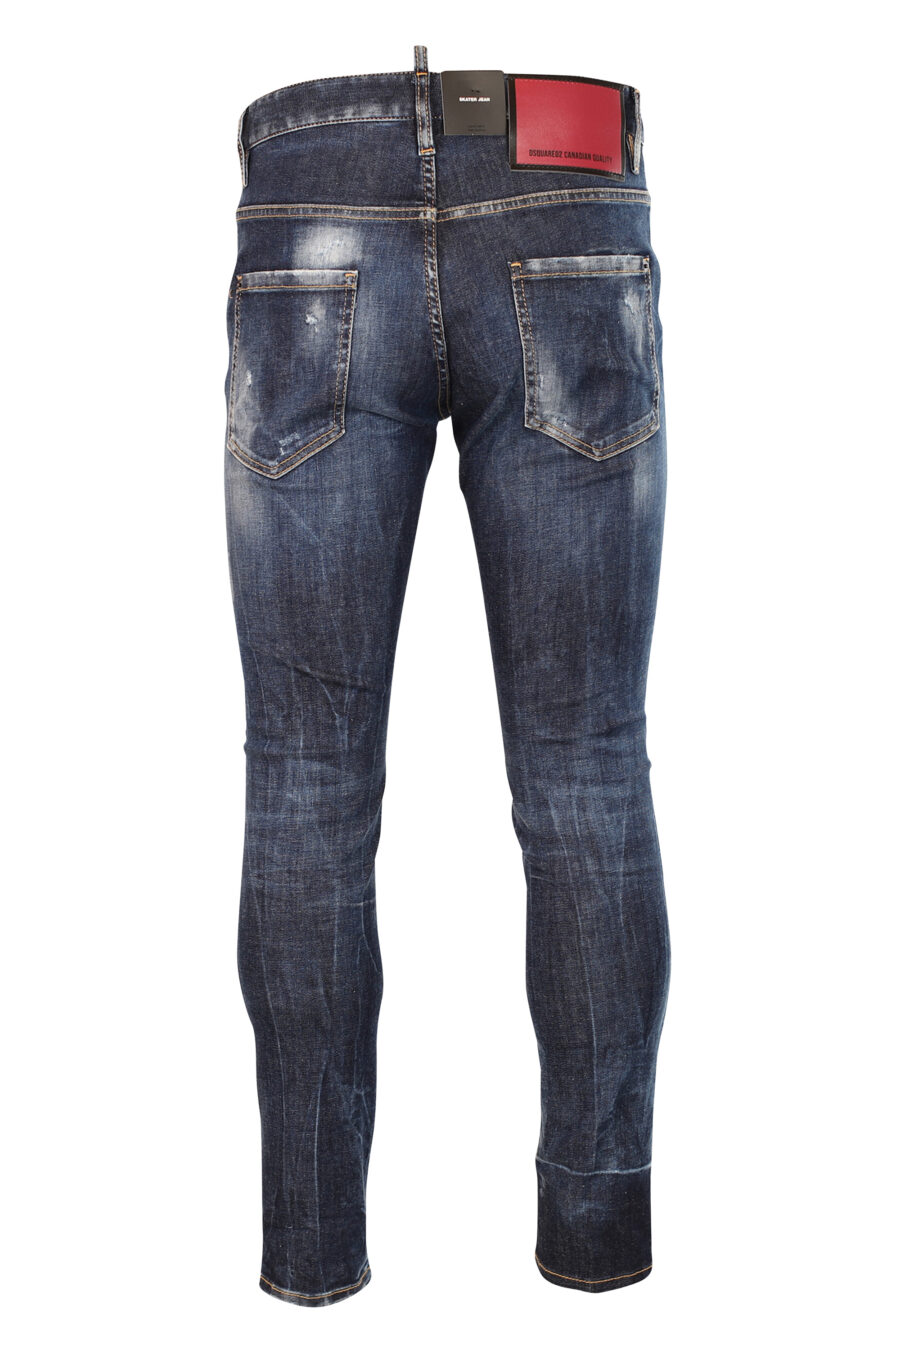 Dsquared2 - Blue skater jean jeans with rips and frayed - BLS